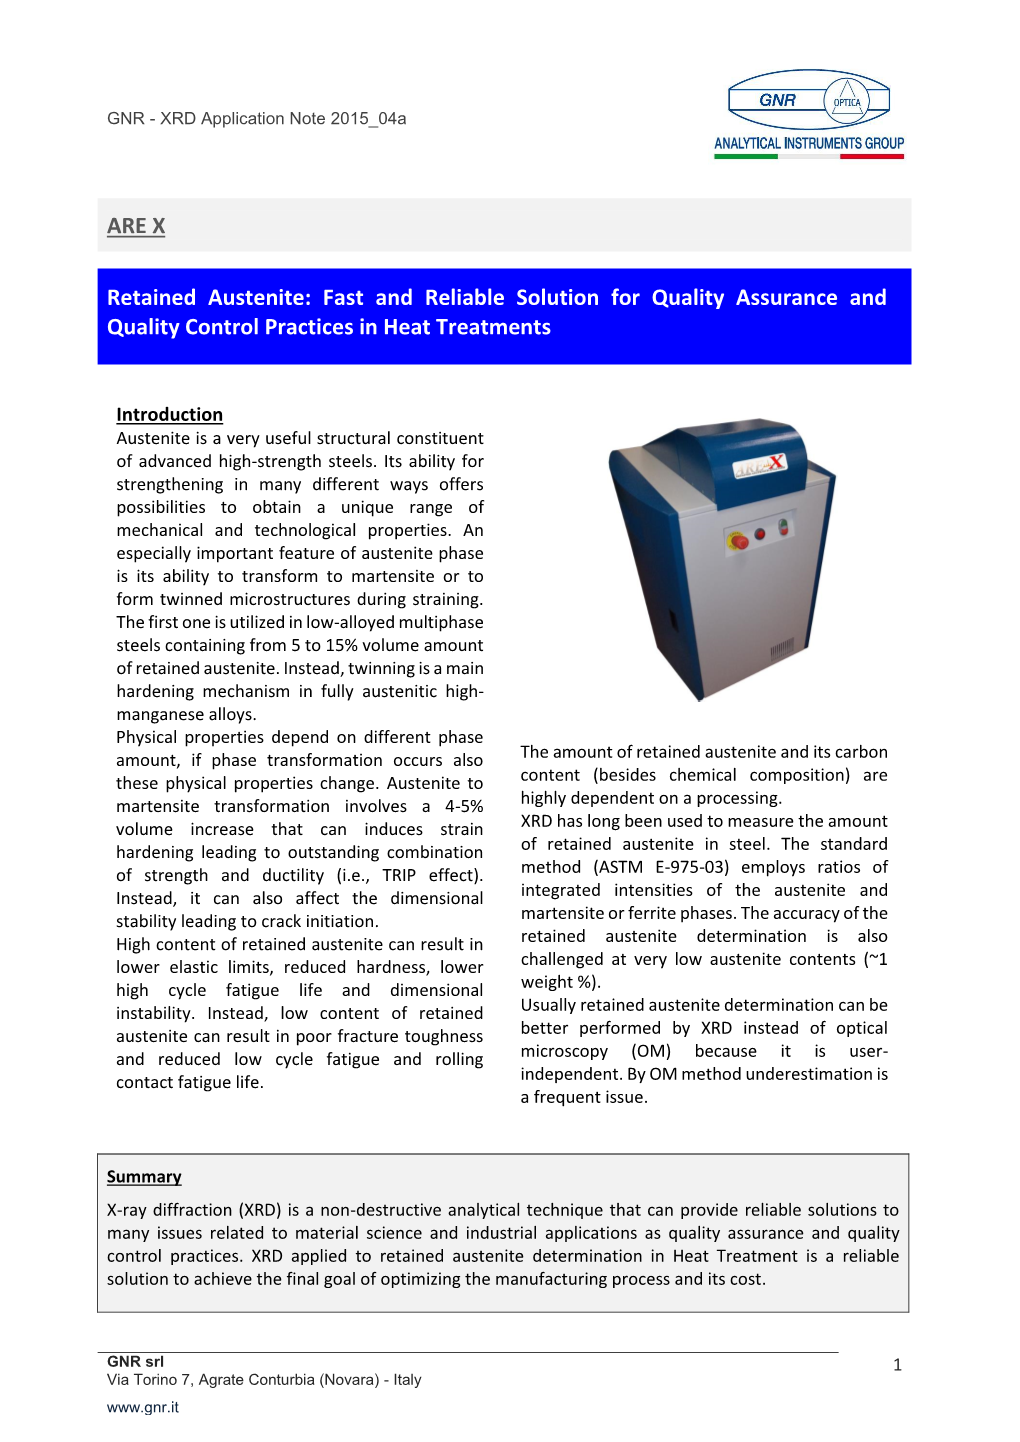 Application Note: Retained Austenite in Heat Treatments